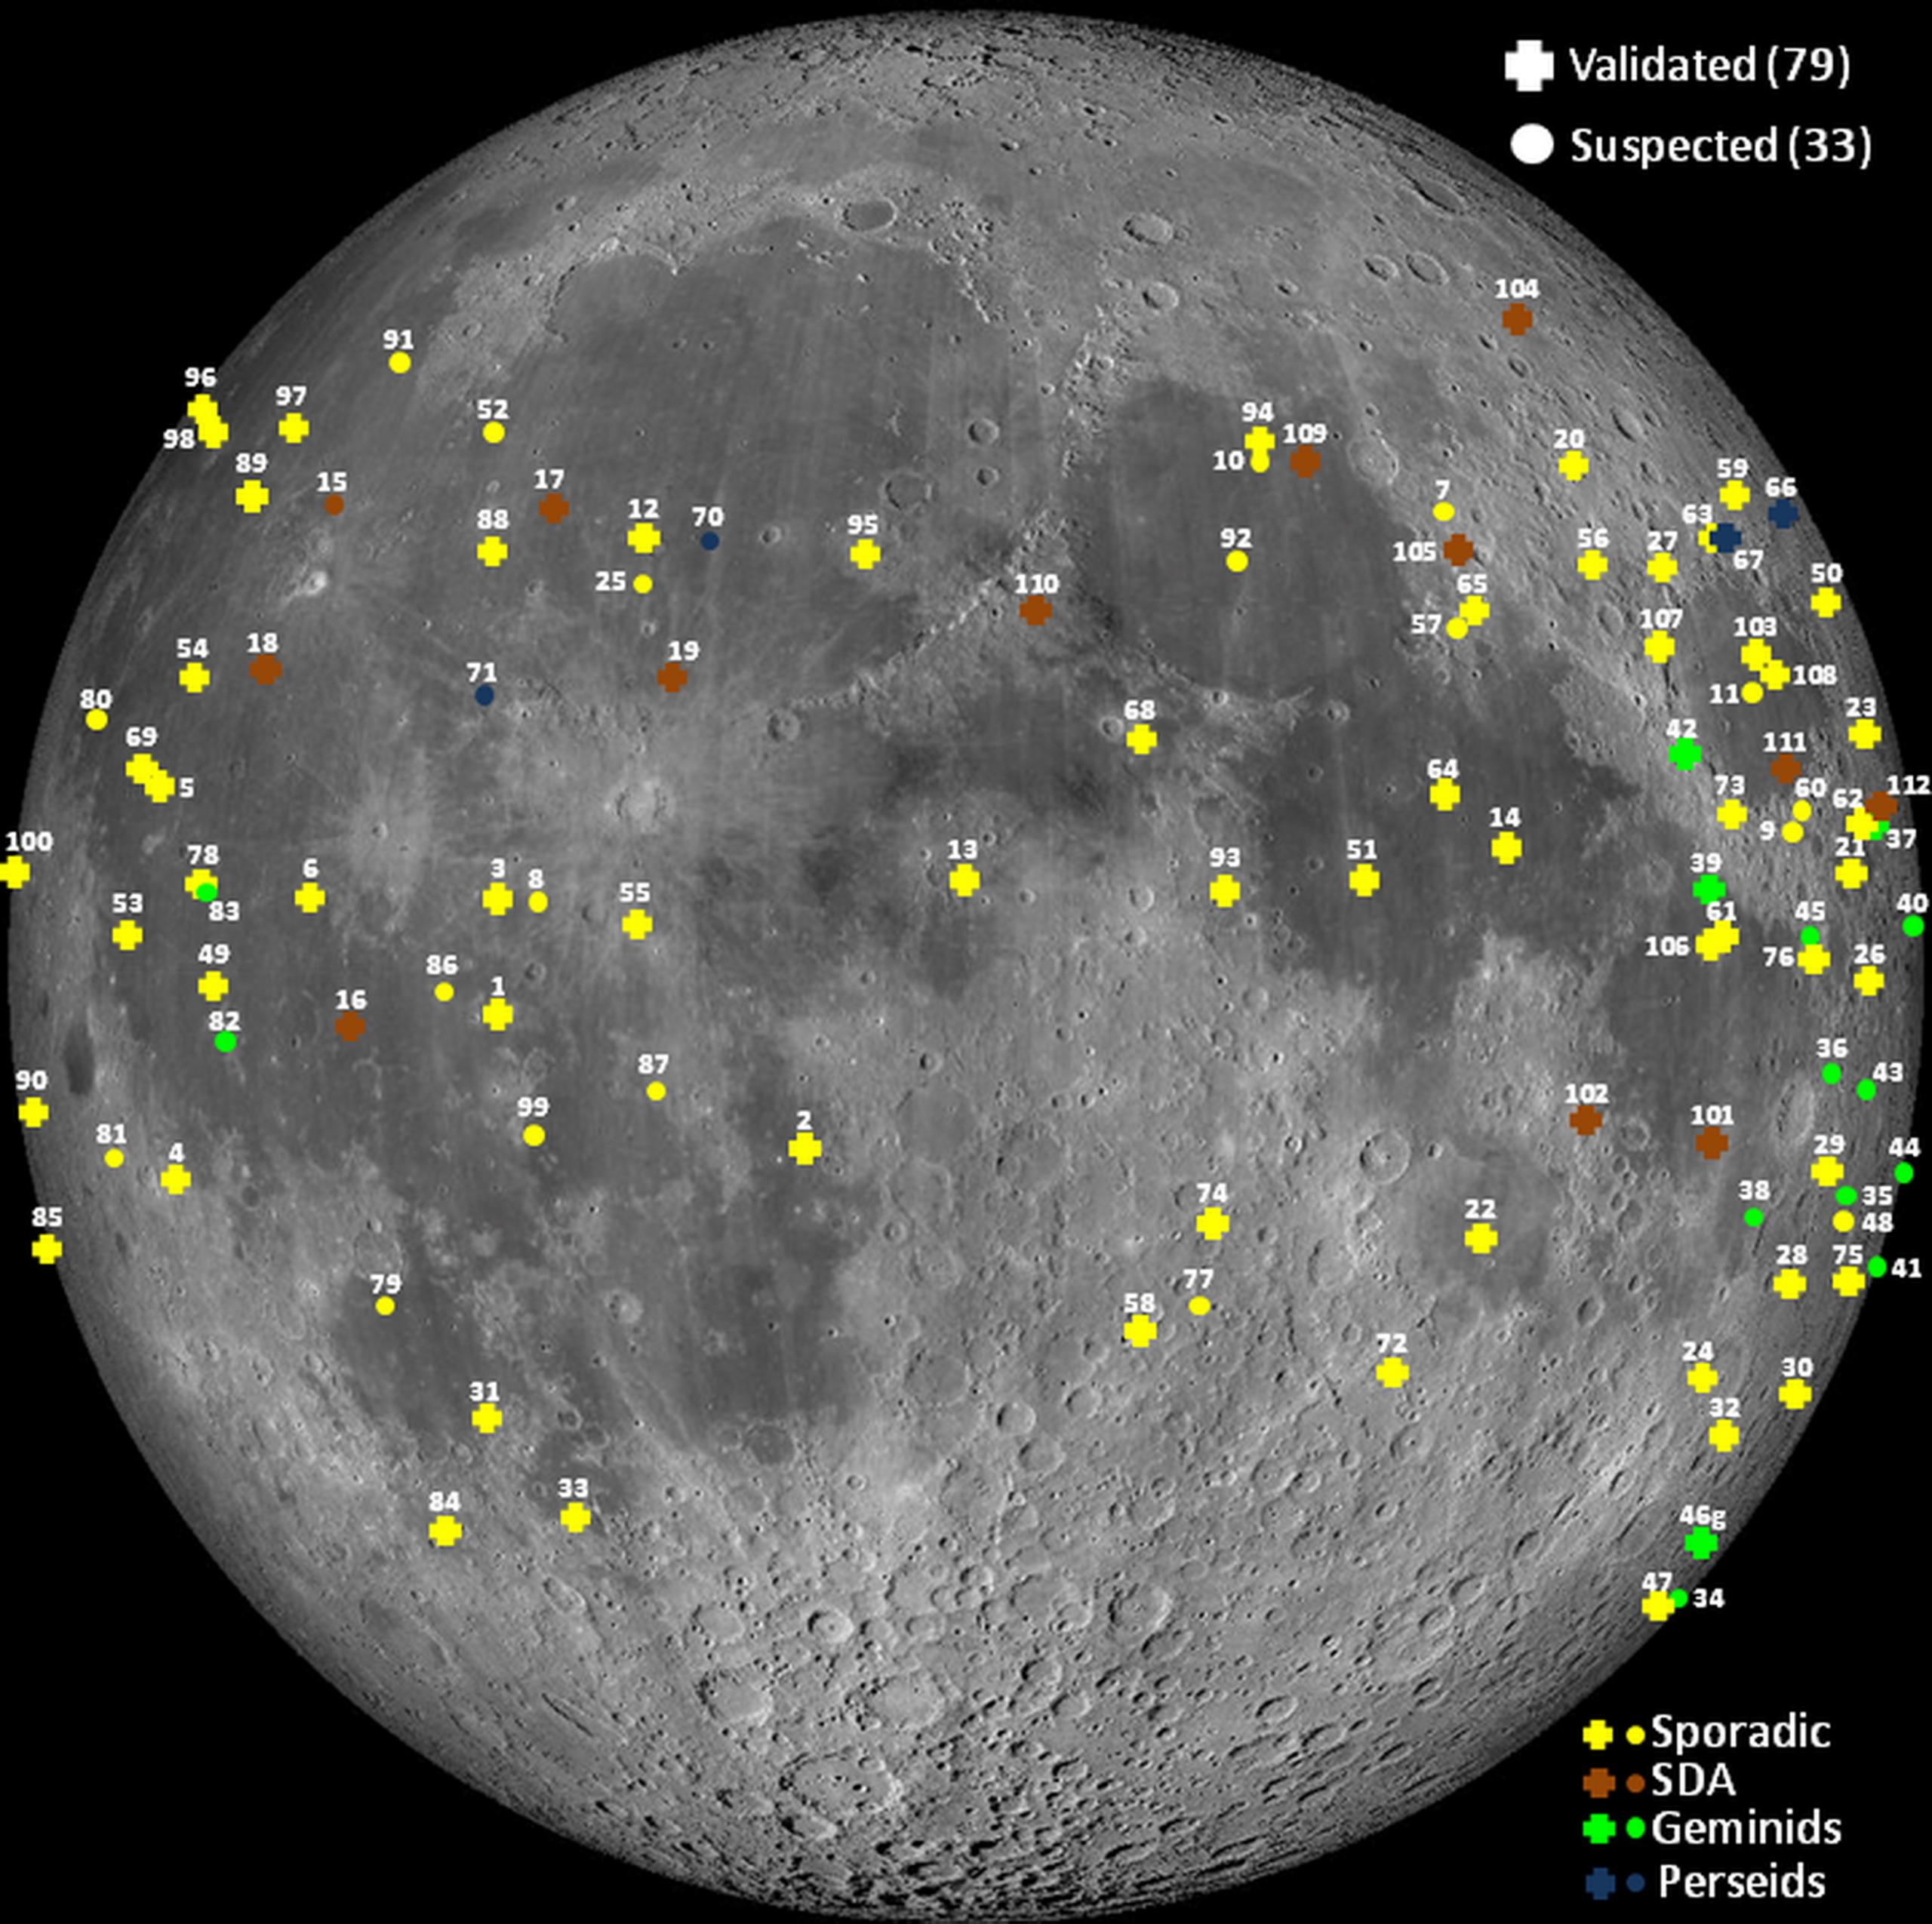 Image with lunar impact flashes detected by the NELIOTA